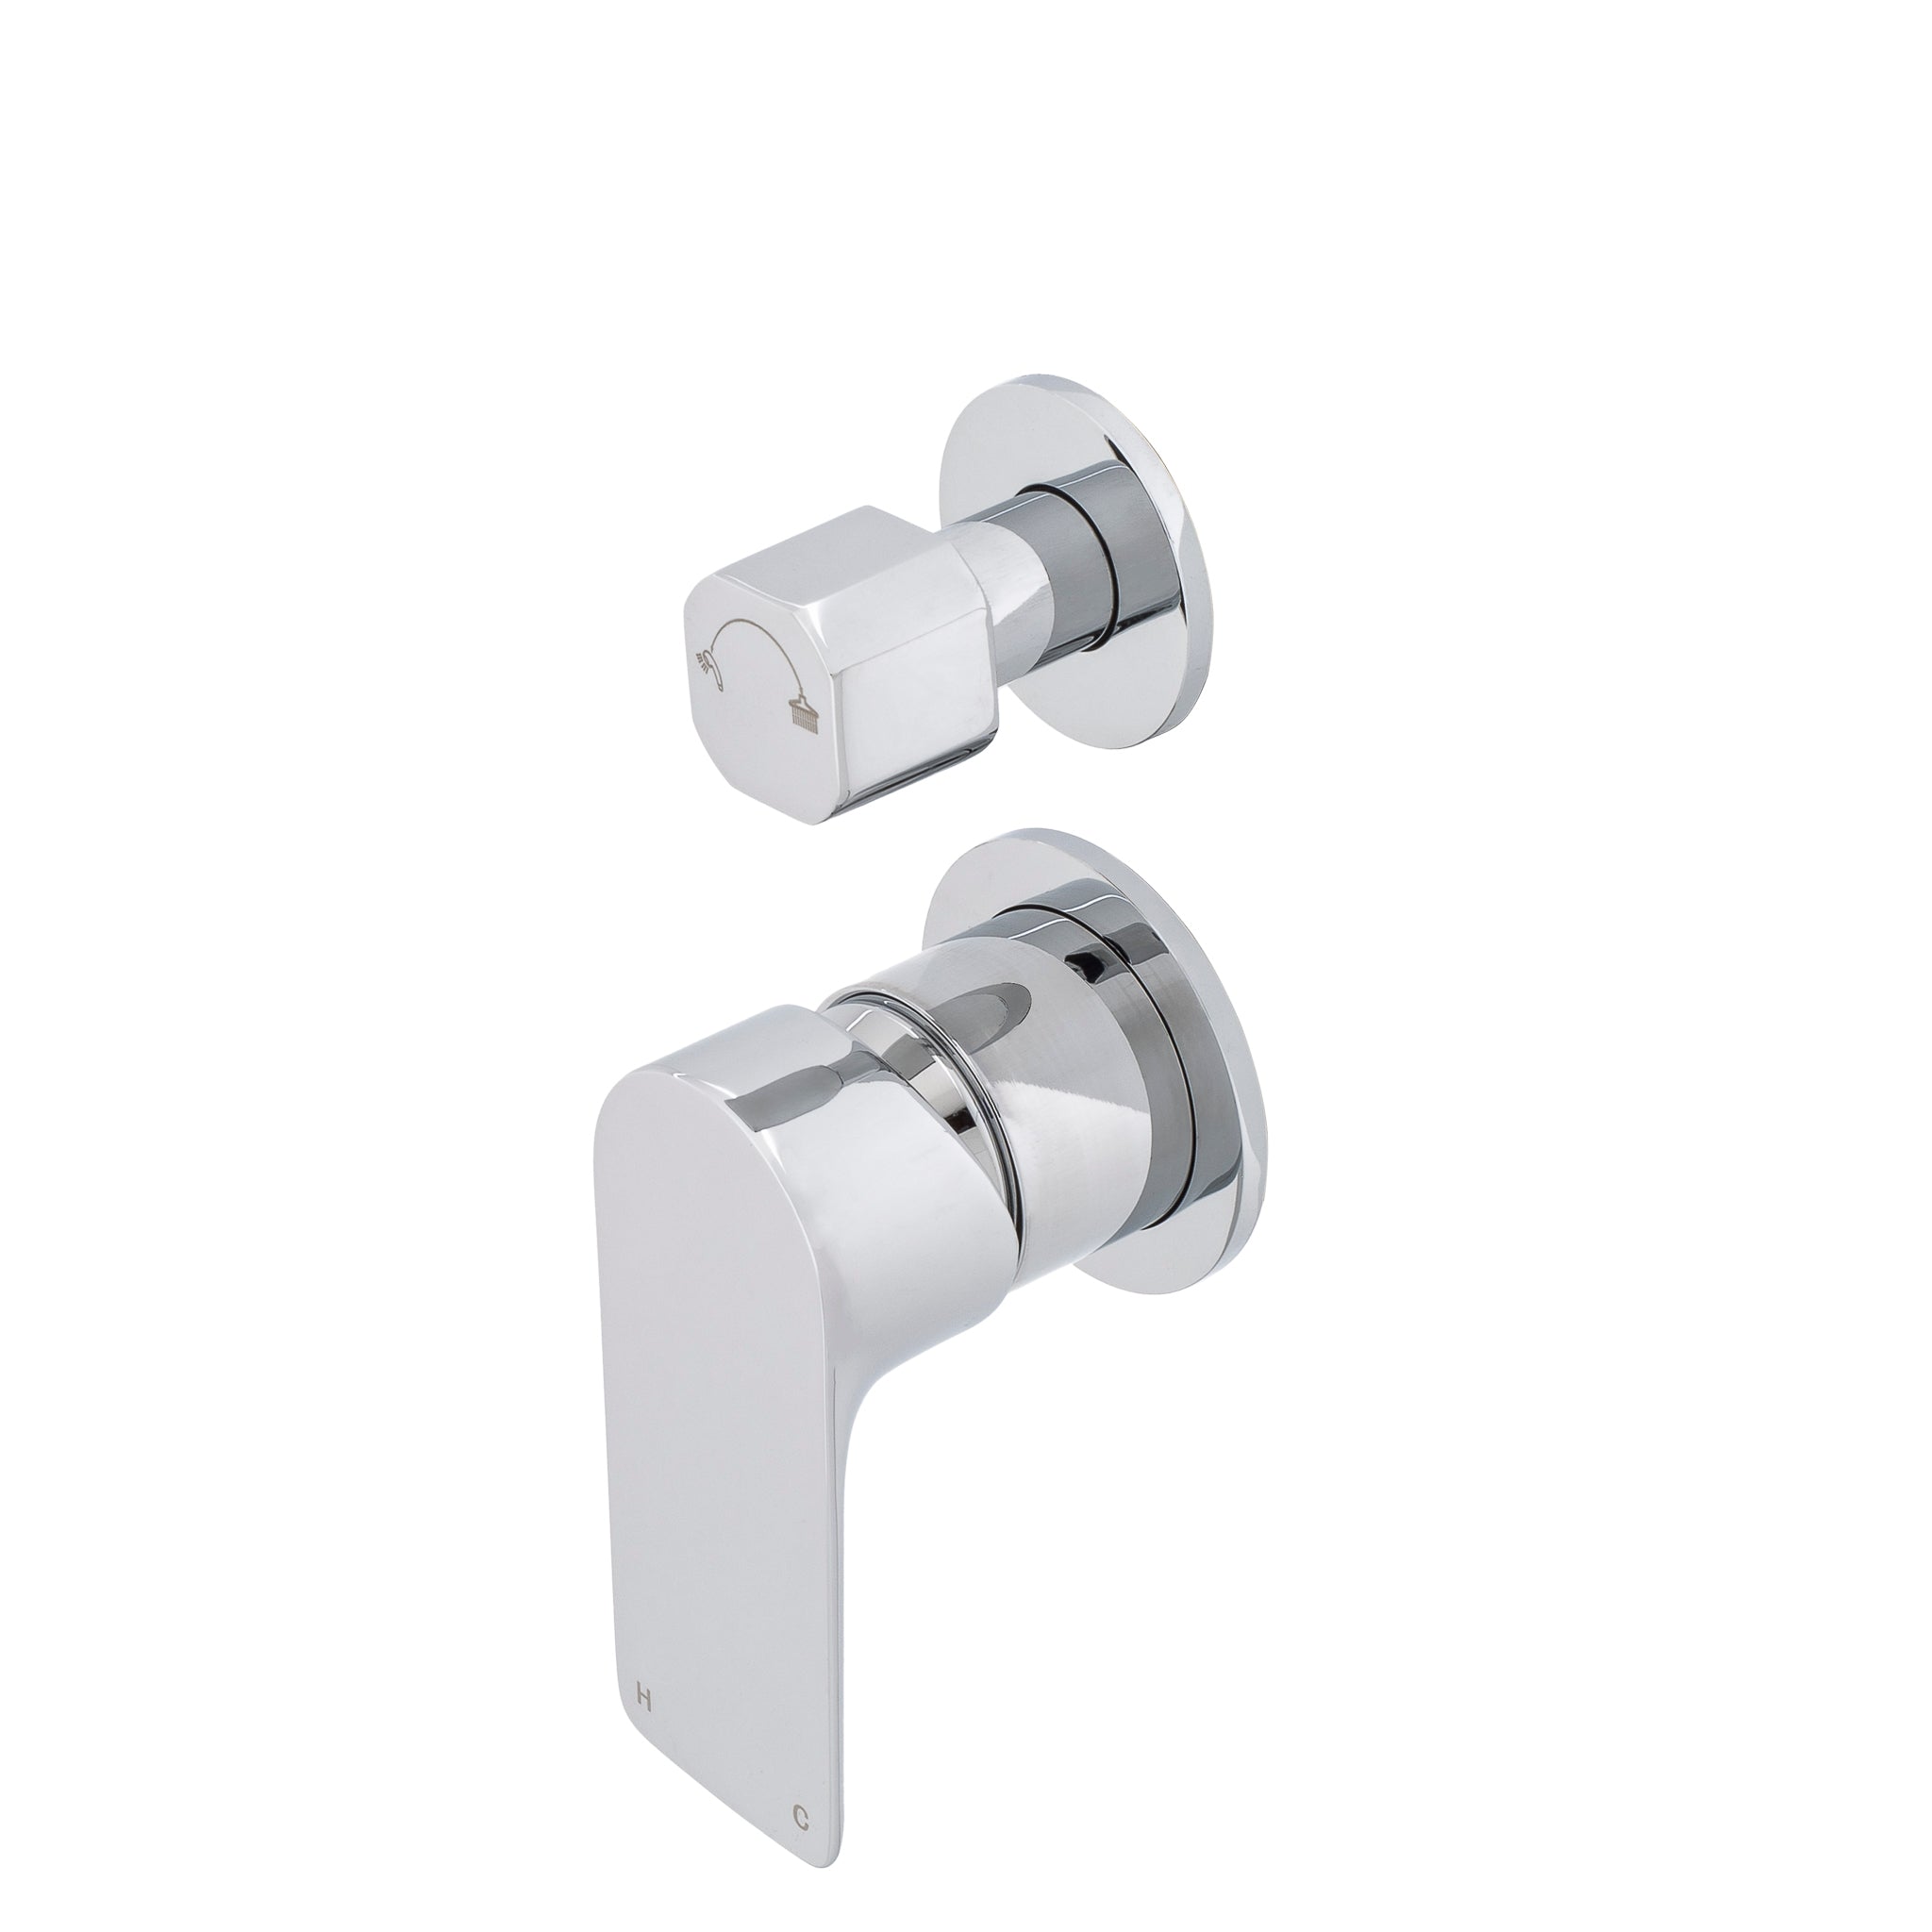 Jena Shower/ Bath Wall Mixer with Diverter and Round Plates, Polished Chrome